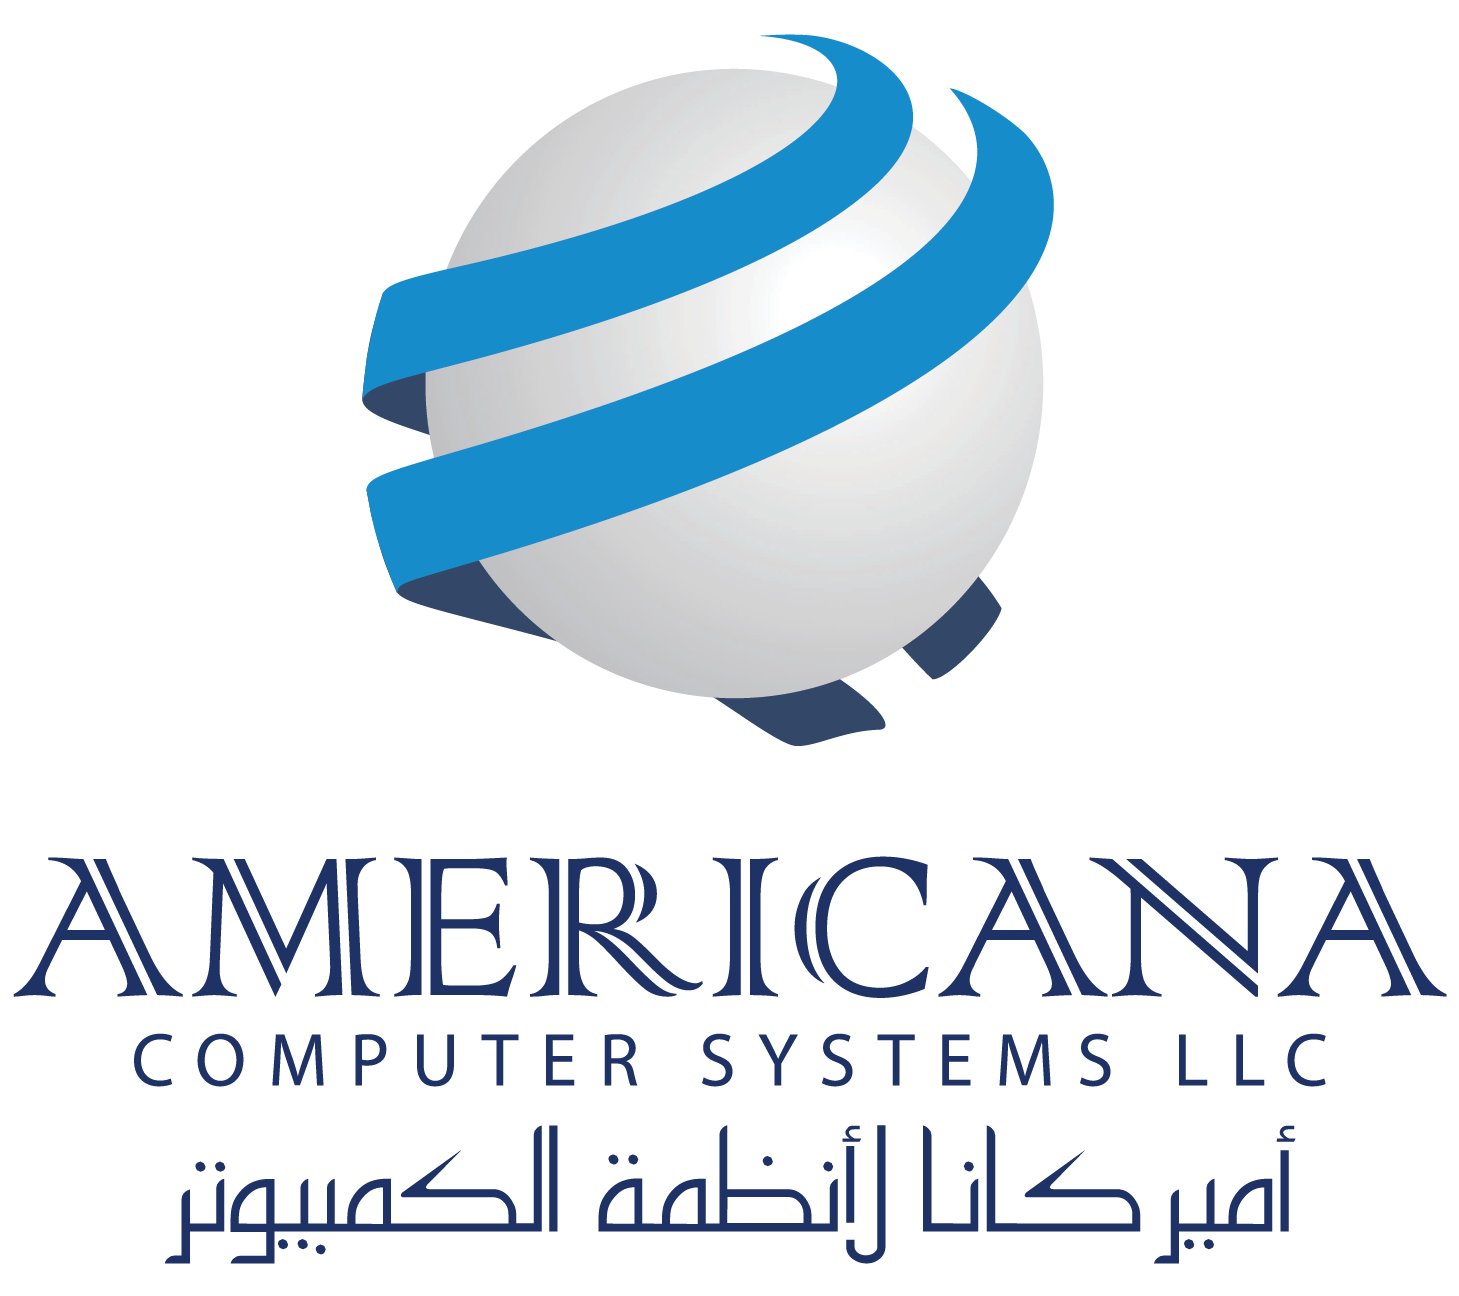 Americana Computer Systems